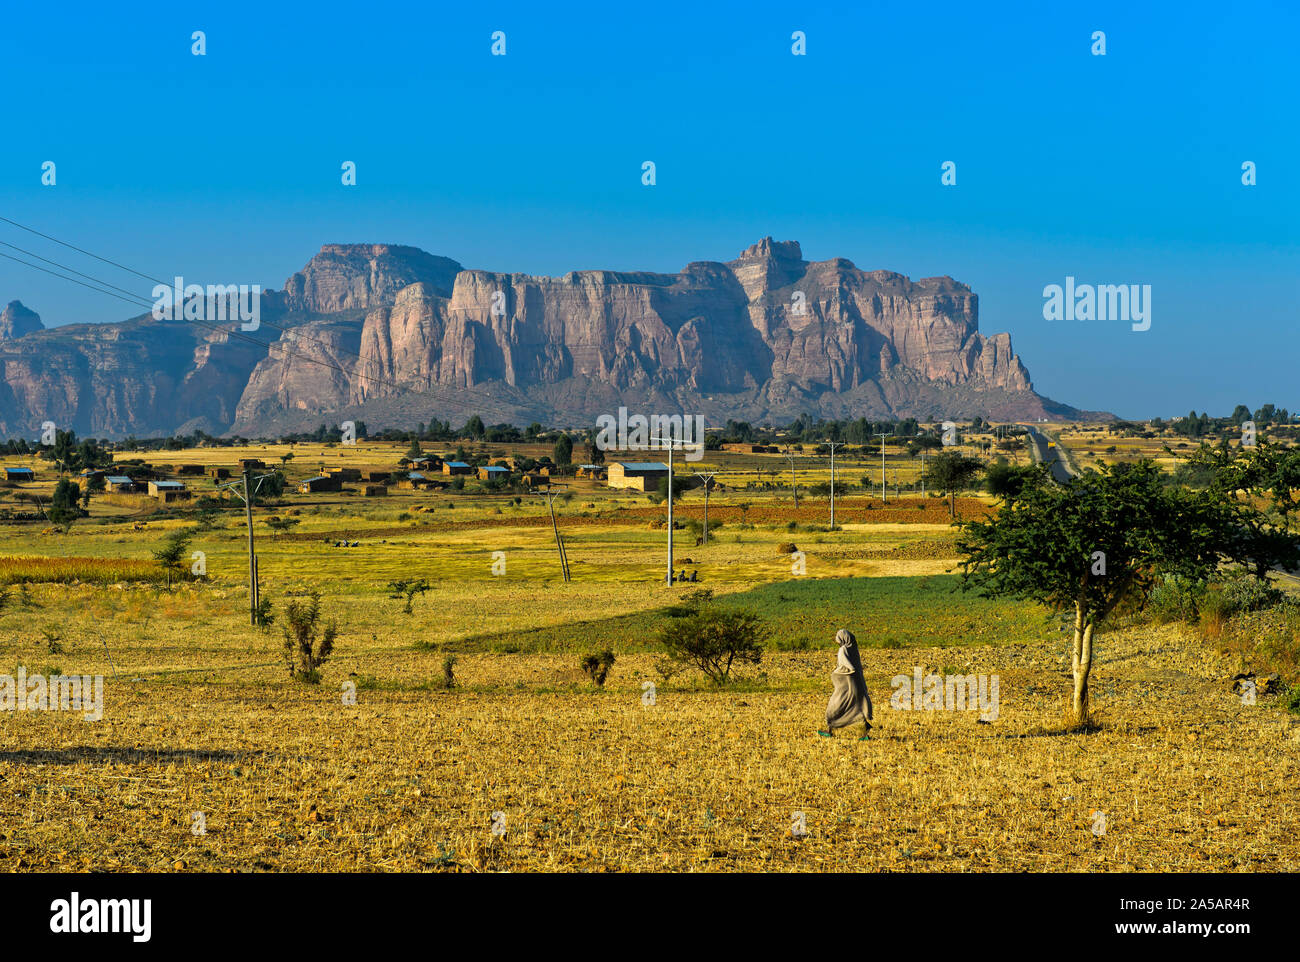 View across the Hawzien Plateau to the Gheralta Mountains, northern part of the East African Rift Valley, Hawzien, Tigray, Ethiopia Stock Photo